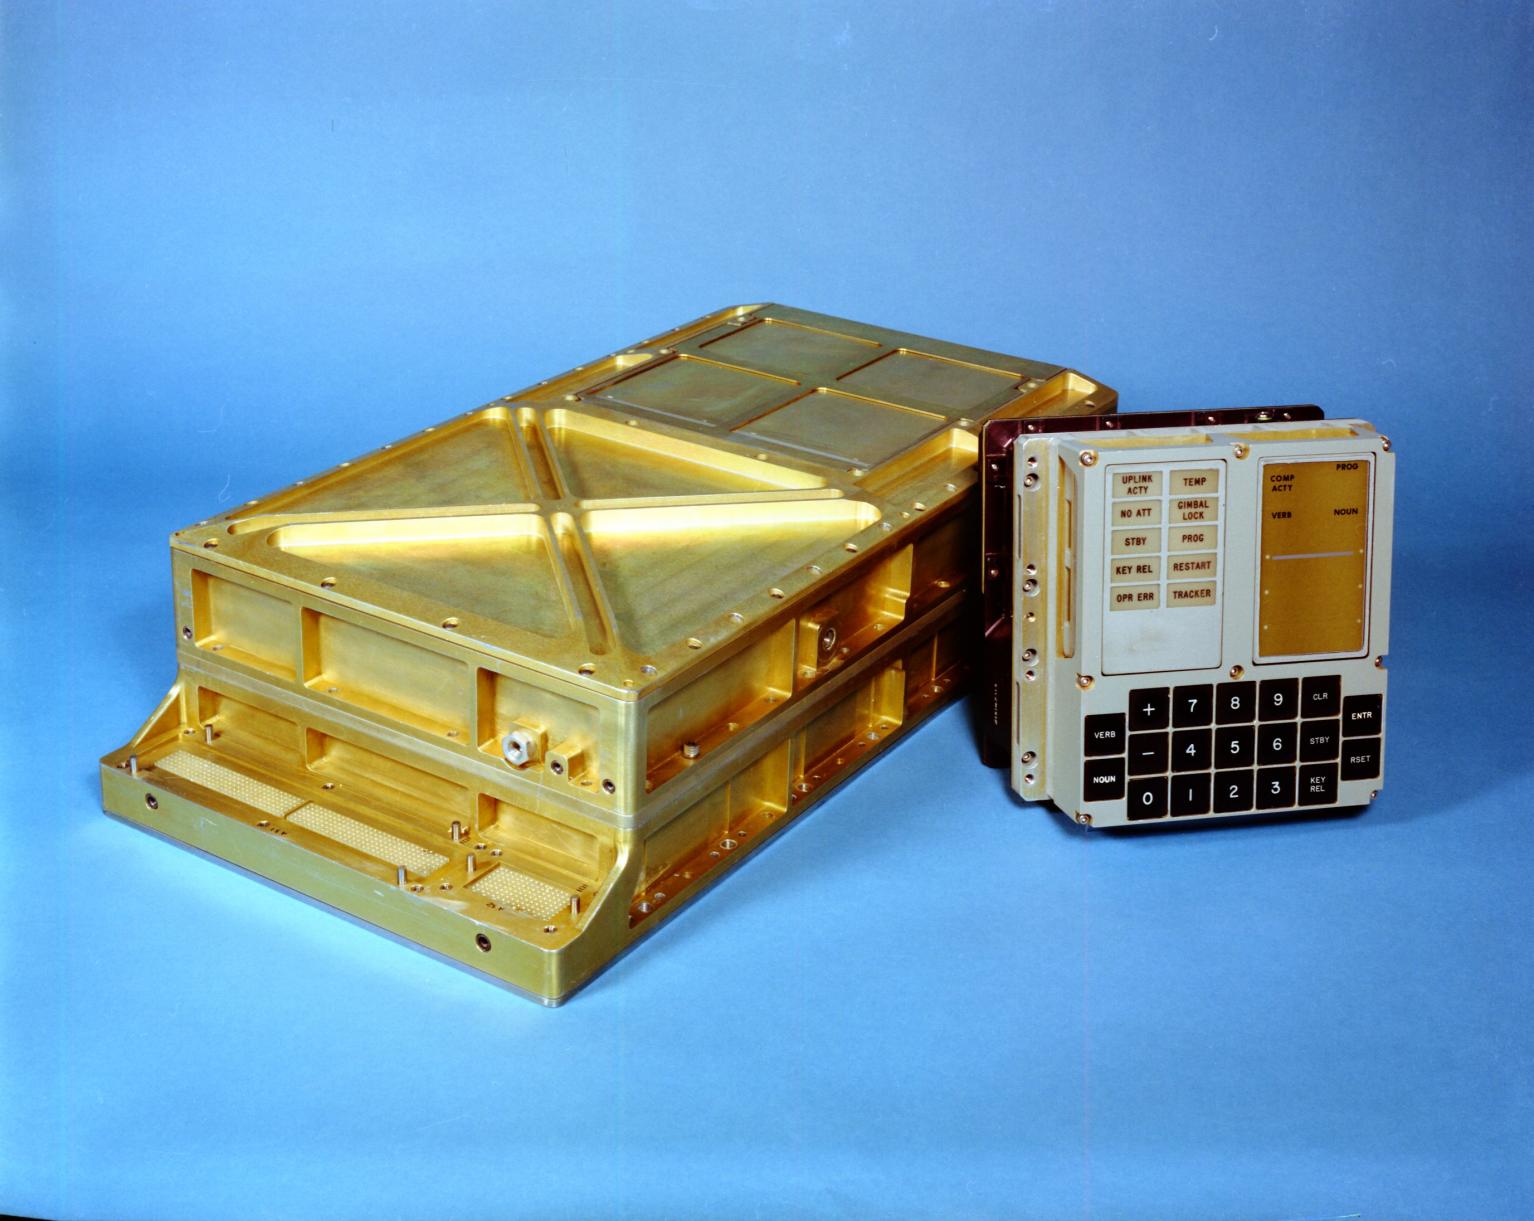 Apollo Guidance Computer and DSKY (Display Keyboard)